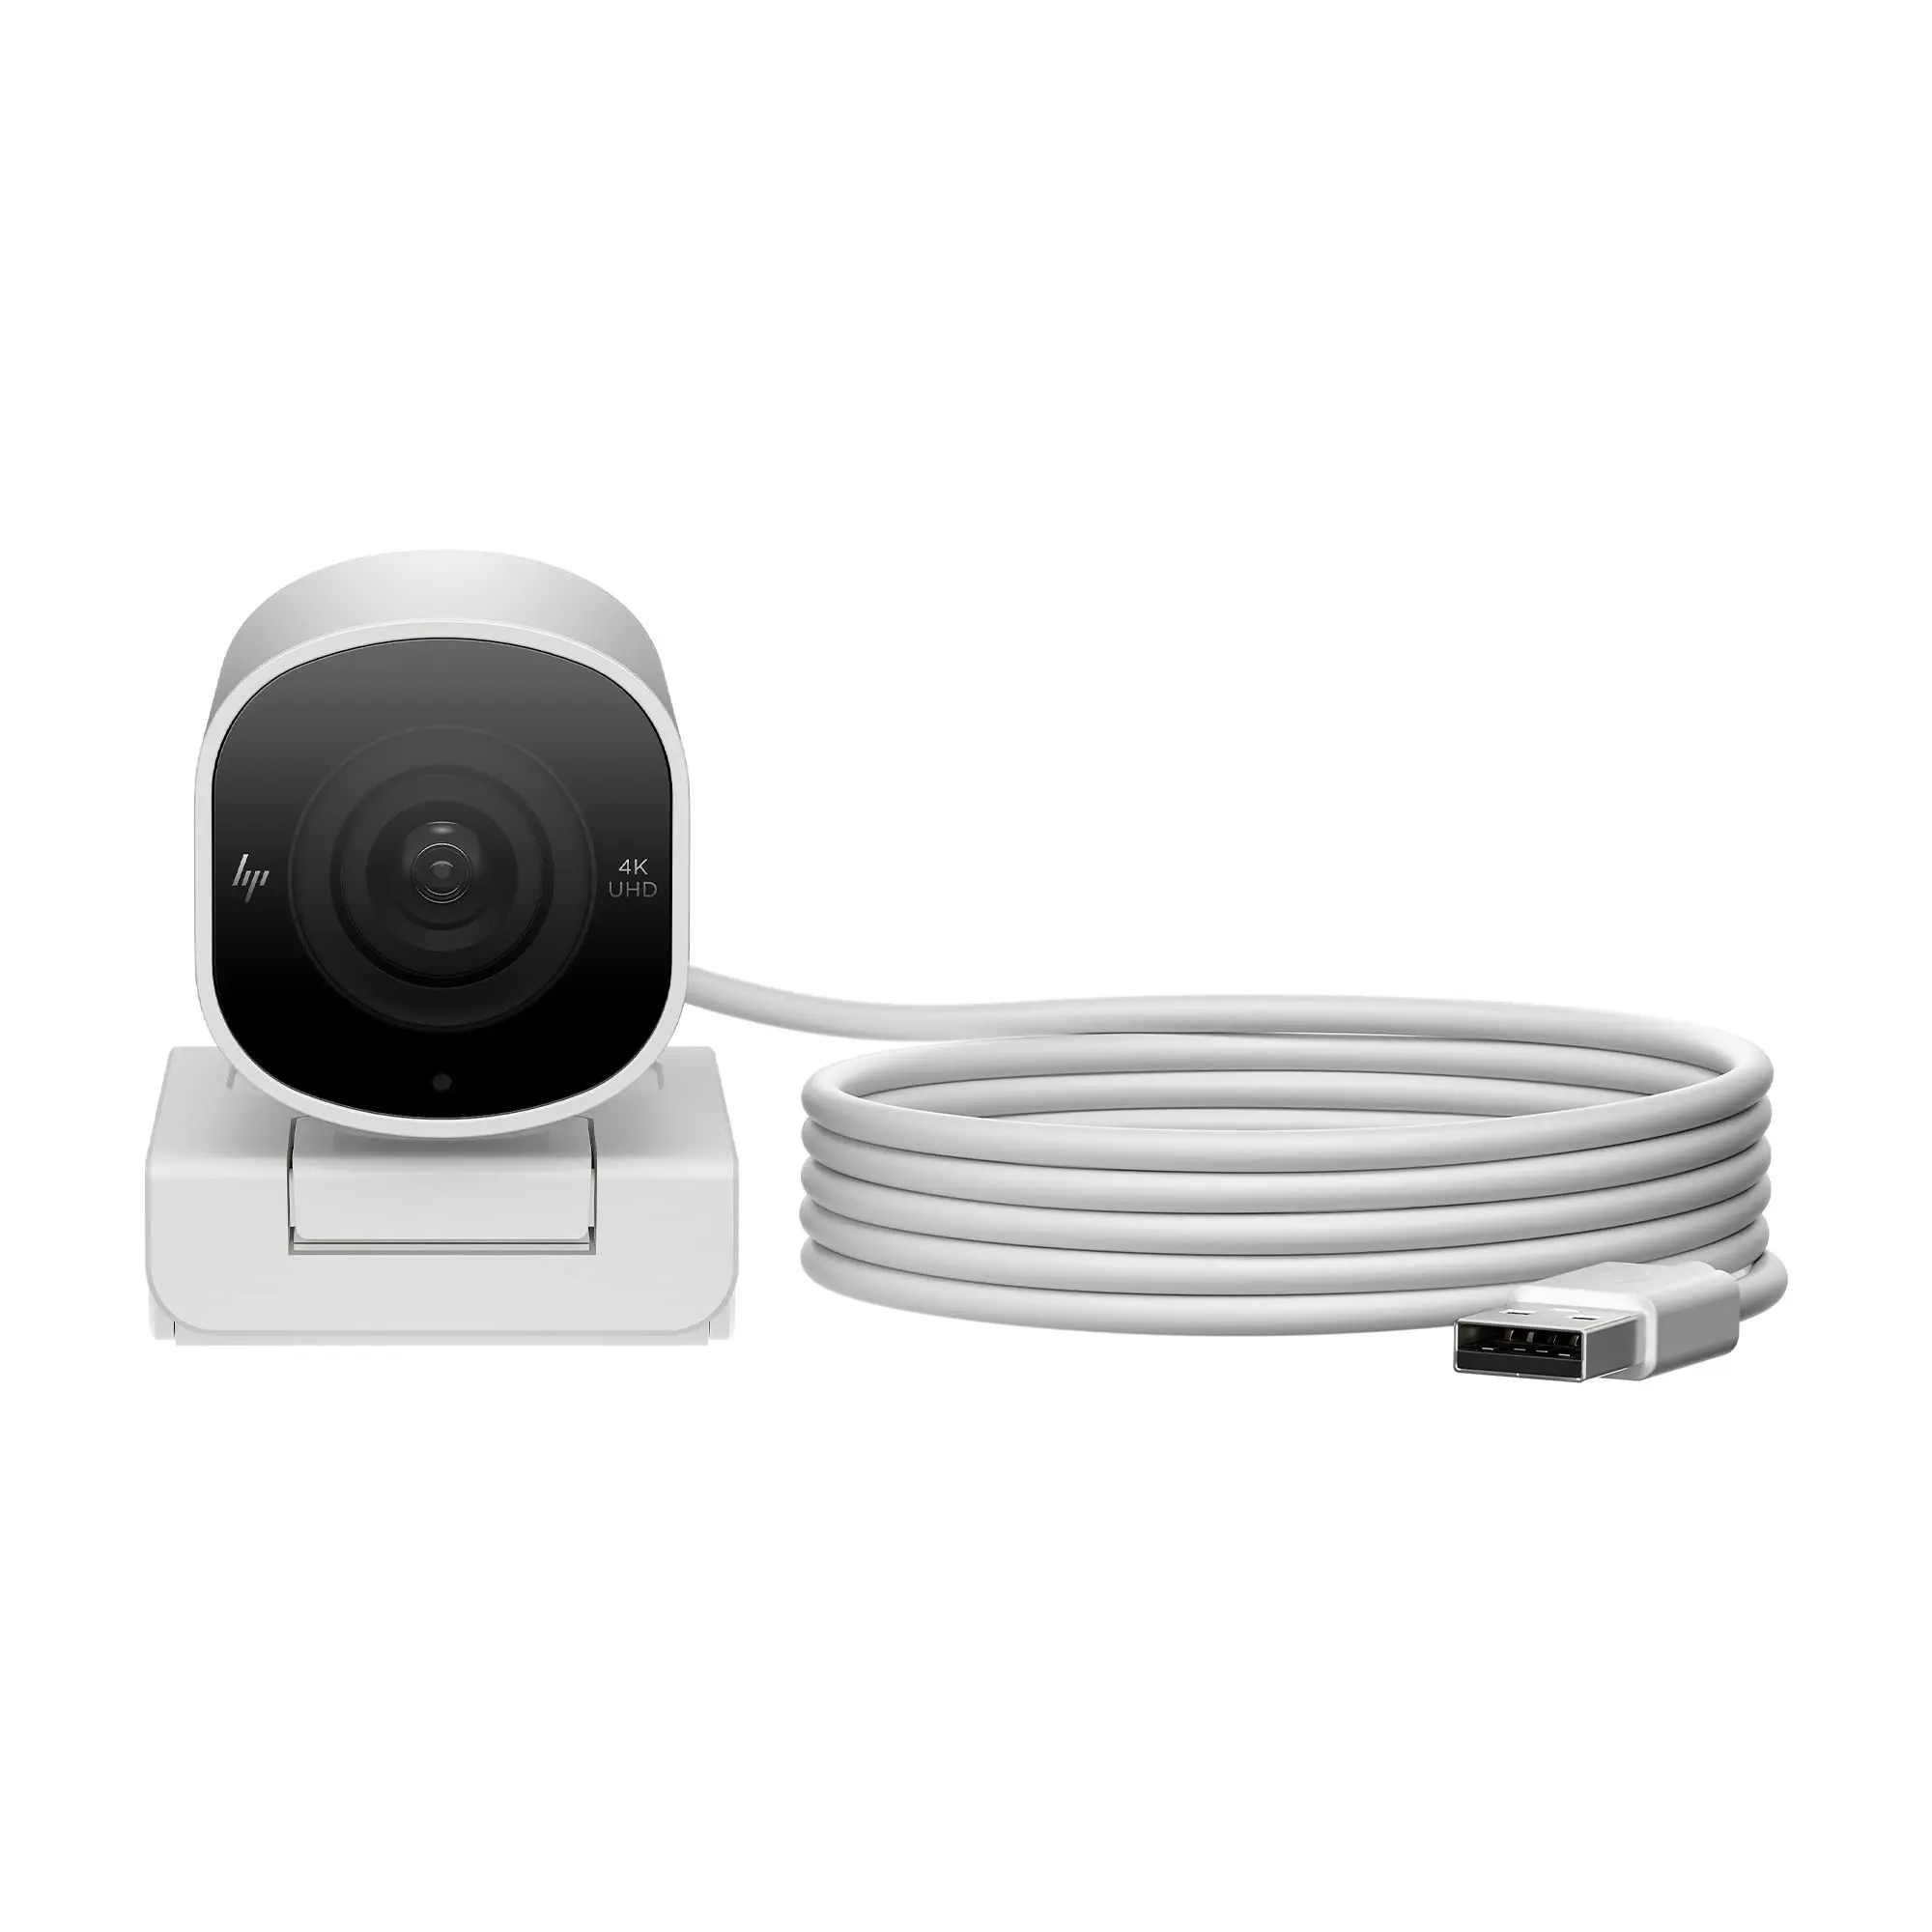 hewlett packard security camera - How to connect a security camera to a computer